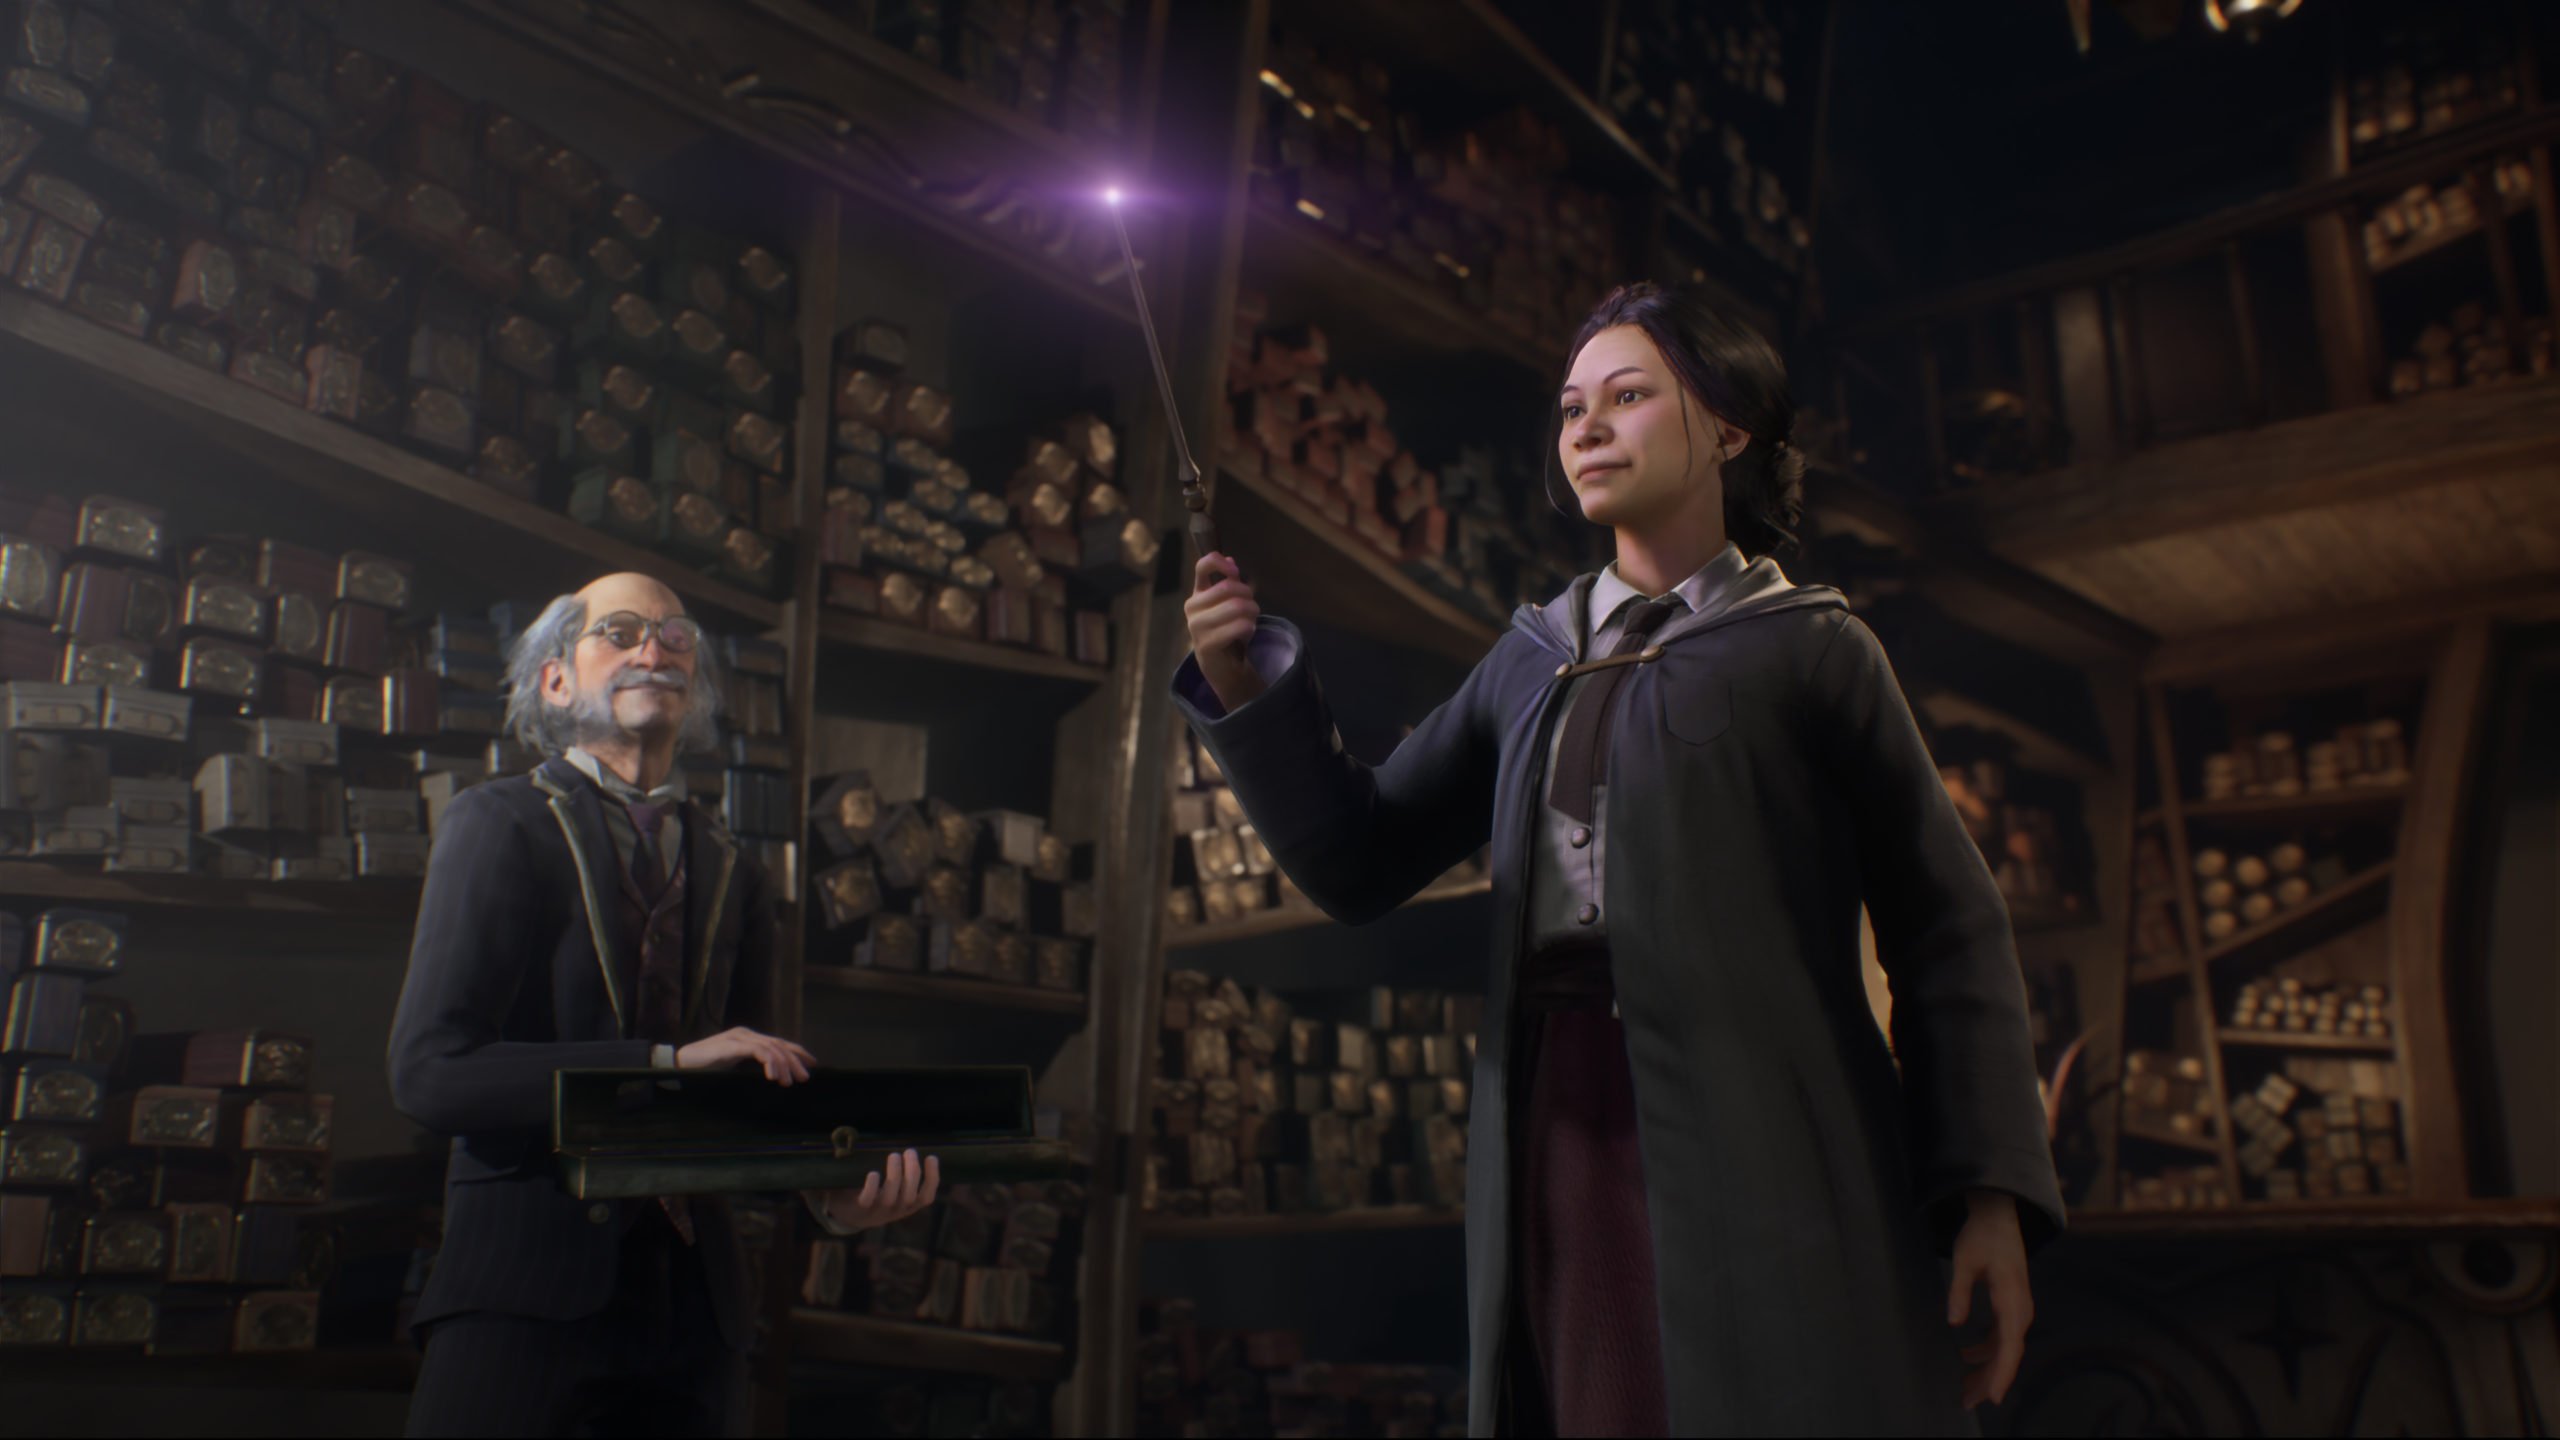 Following new delay claims, an official Hogwarts Legacy update reiterates 2022 release plans - Video Games Chronicle